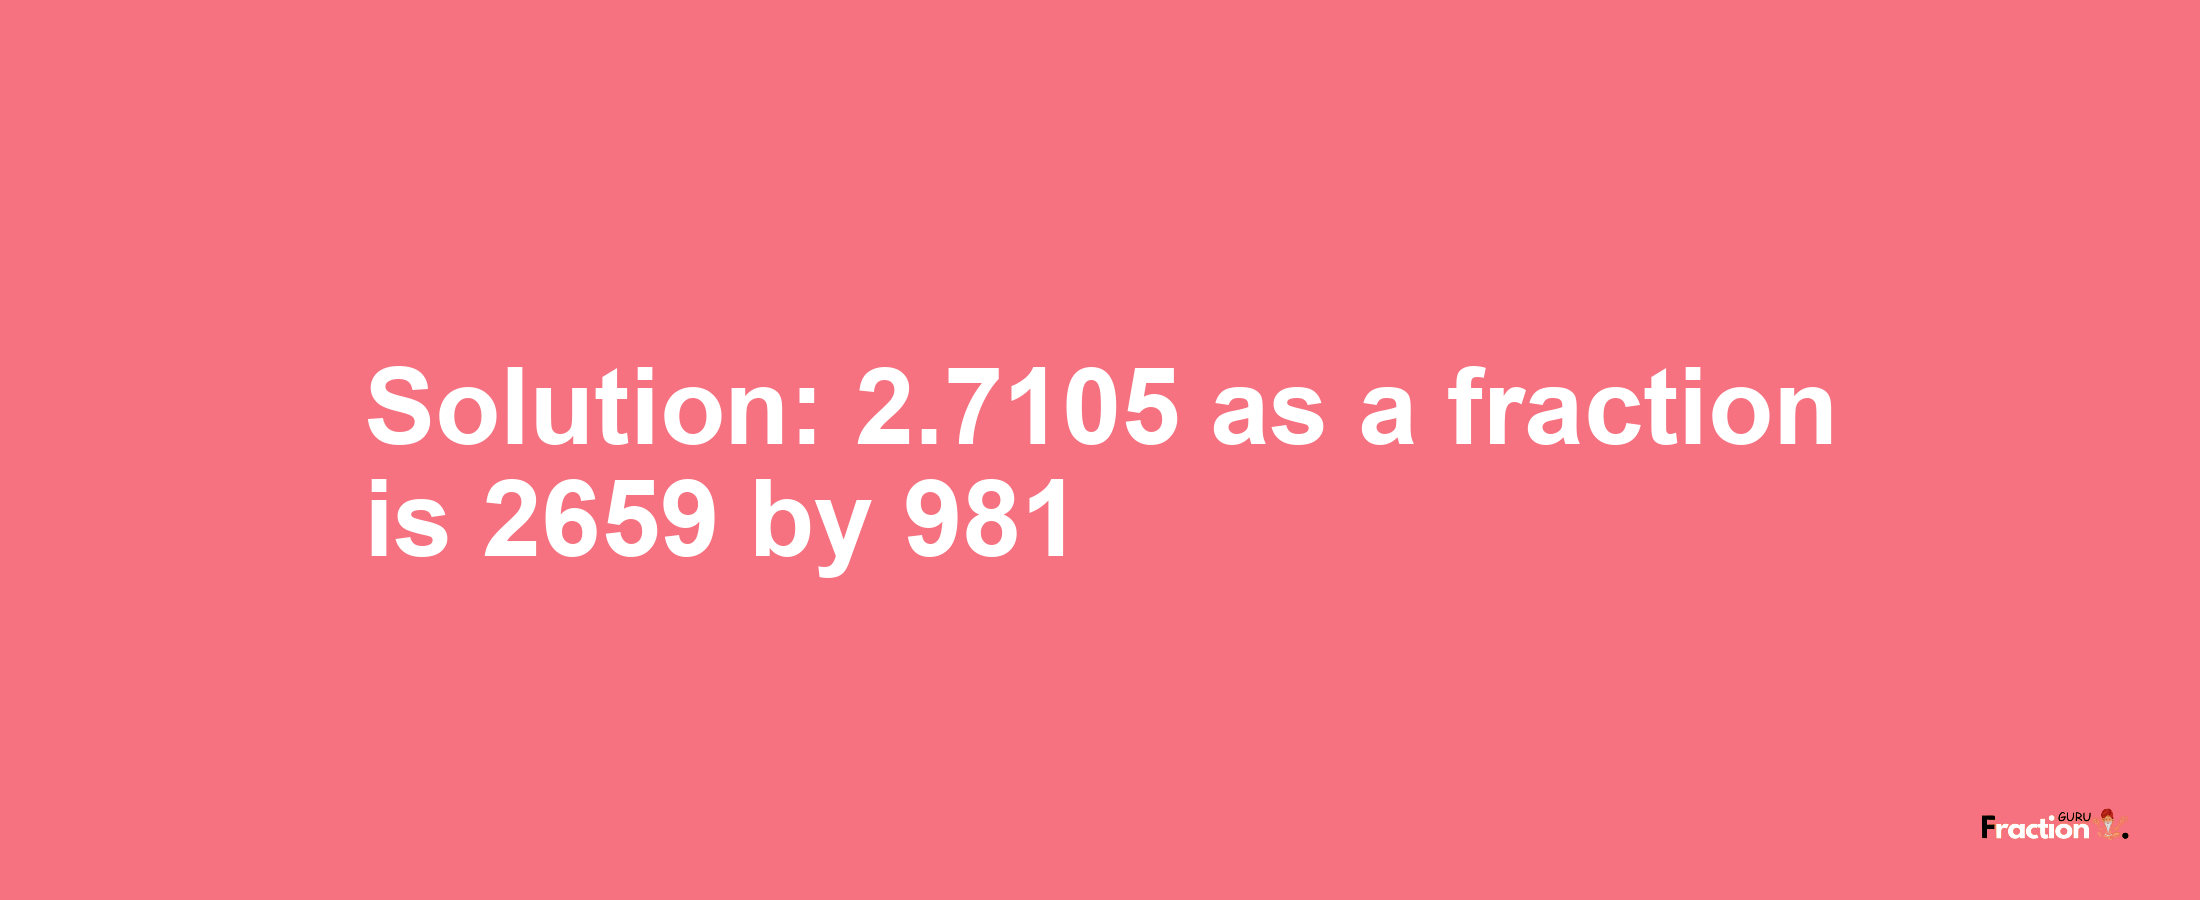 Solution:2.7105 as a fraction is 2659/981